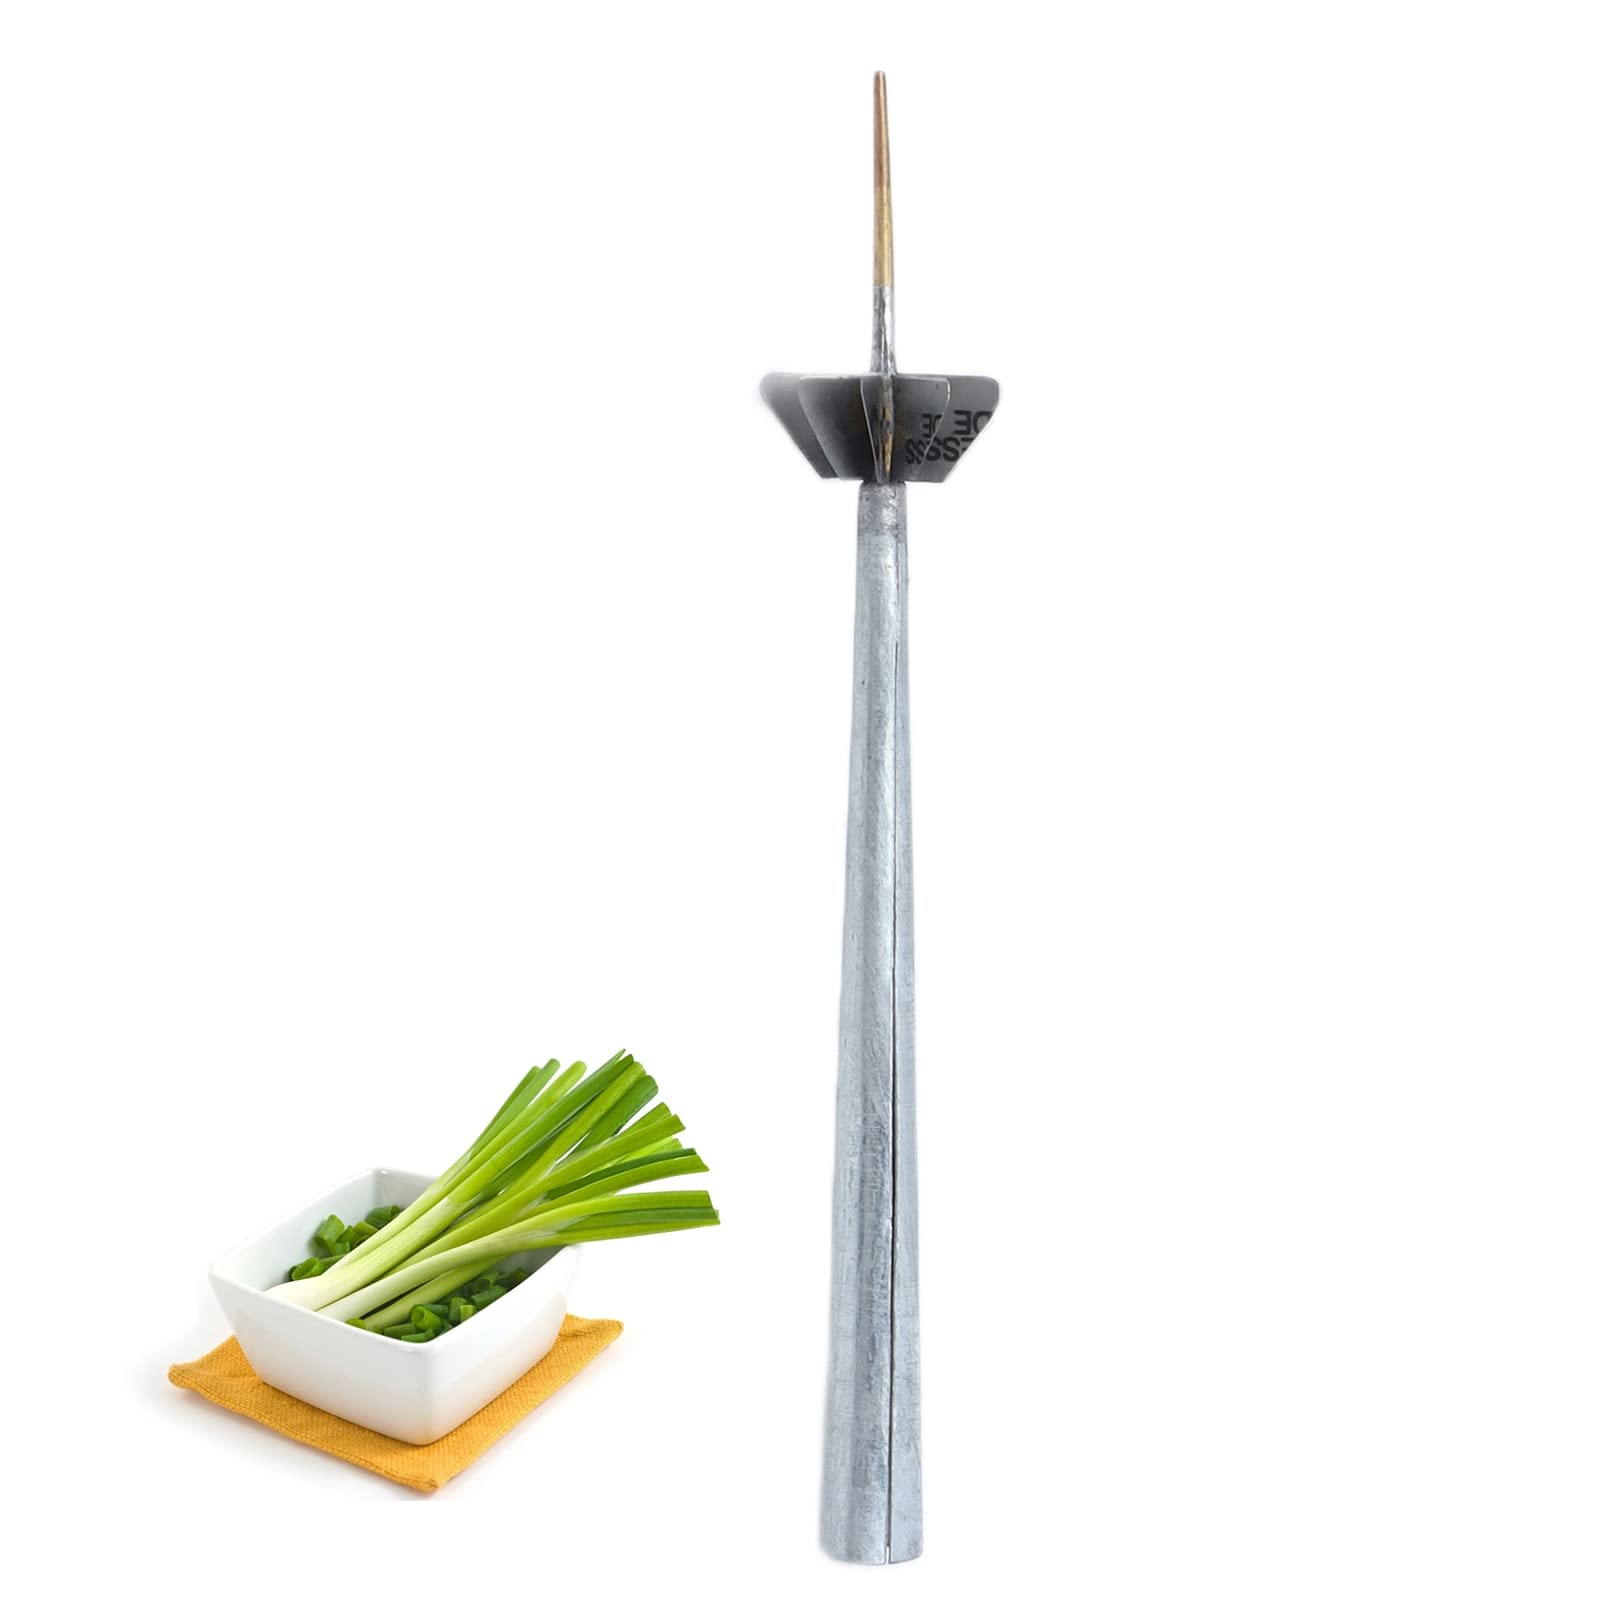 Stainless Steel Onion Cutter, Shred Silk The Knife Sharp Blade Multifunctional for Cutting Vegetable for Cutting Onions